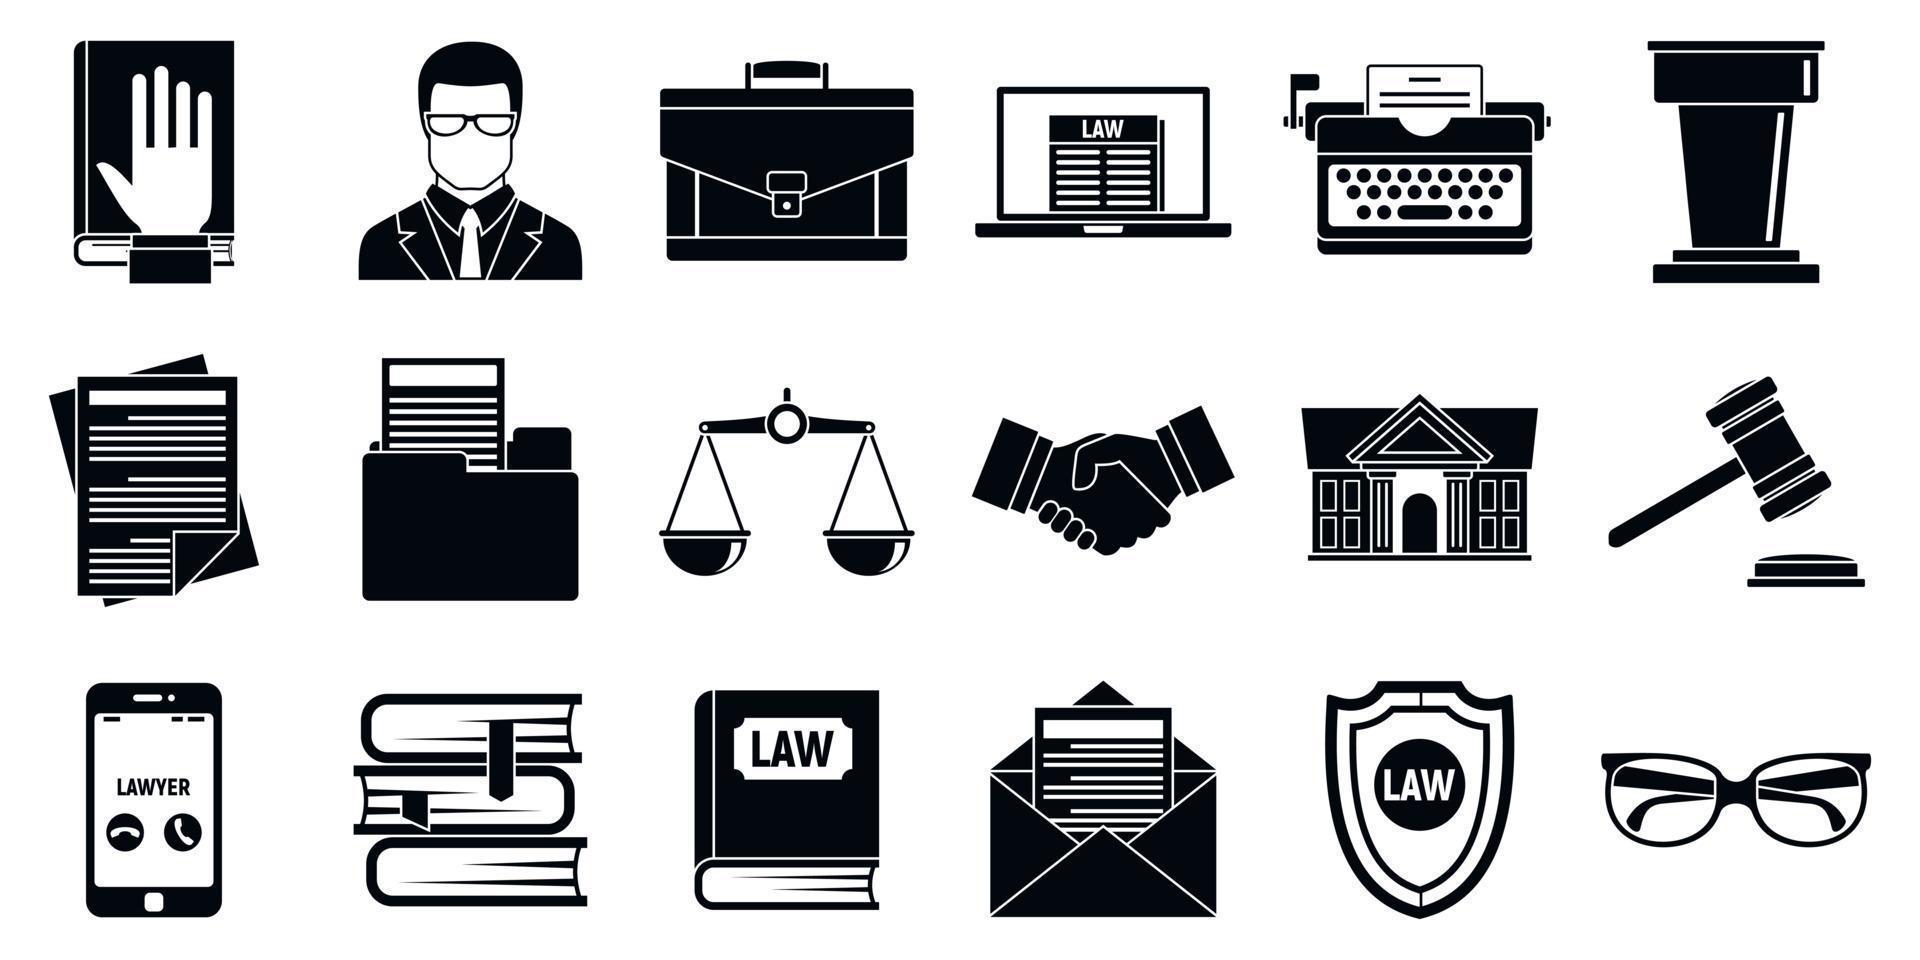 Lawyer legal icons set, simple style vector